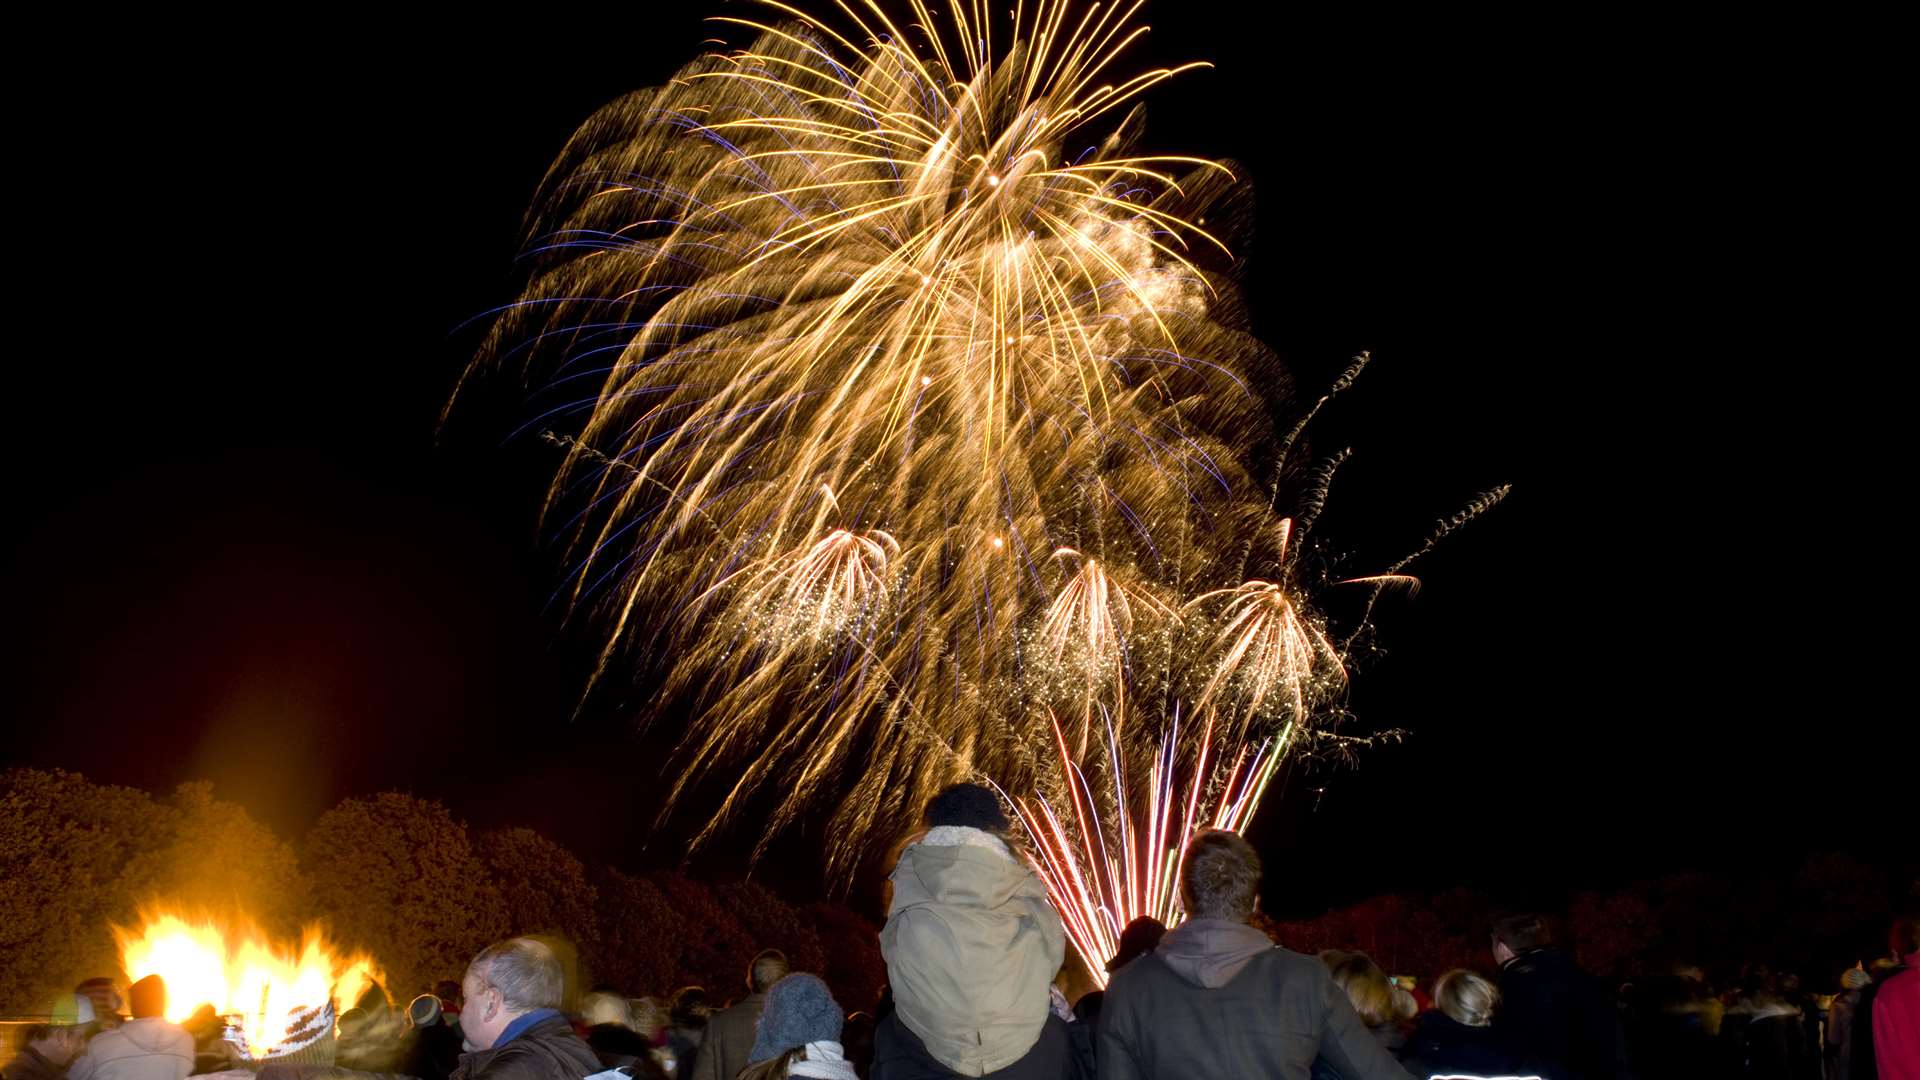 The bonfire and fireworks display has been cancelled